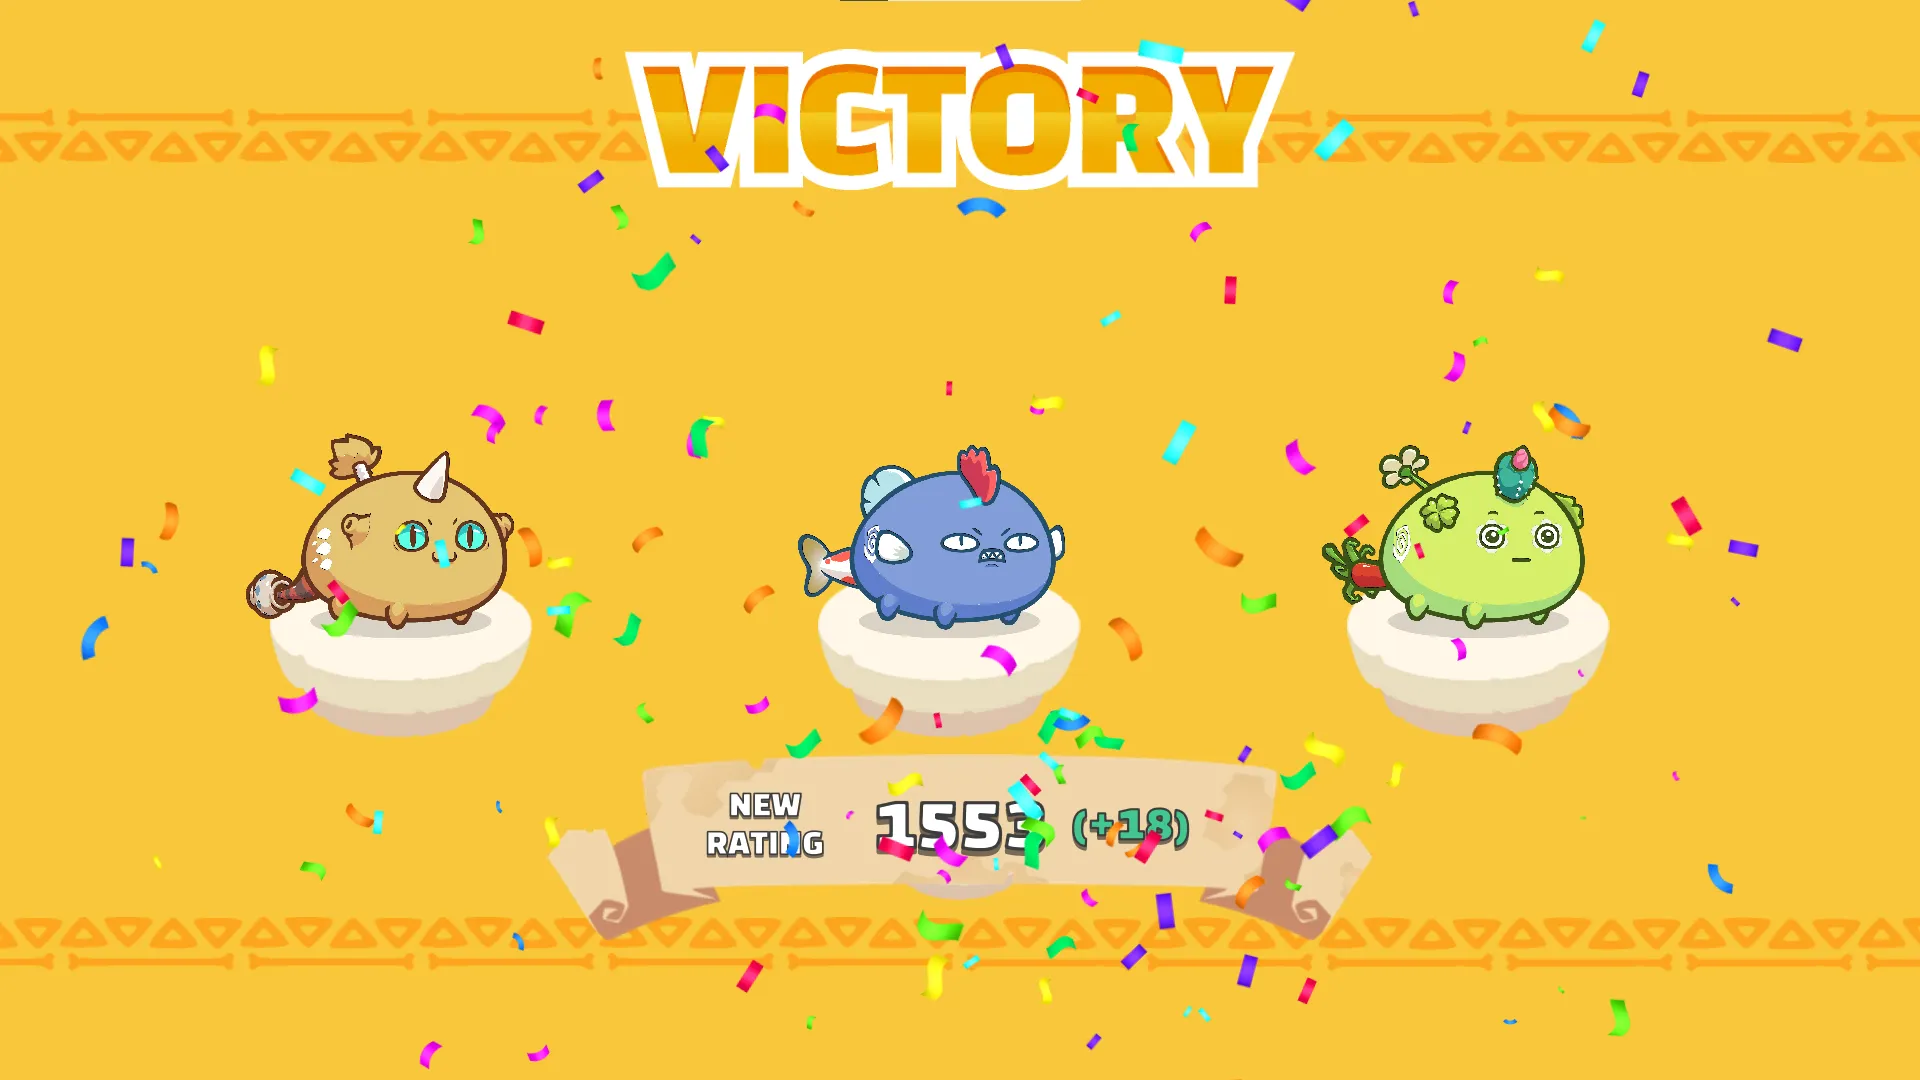 The picture represents the victory poster when an Axie owner wins an Arena game. It displays the Axie team they used along with their Arena rating.